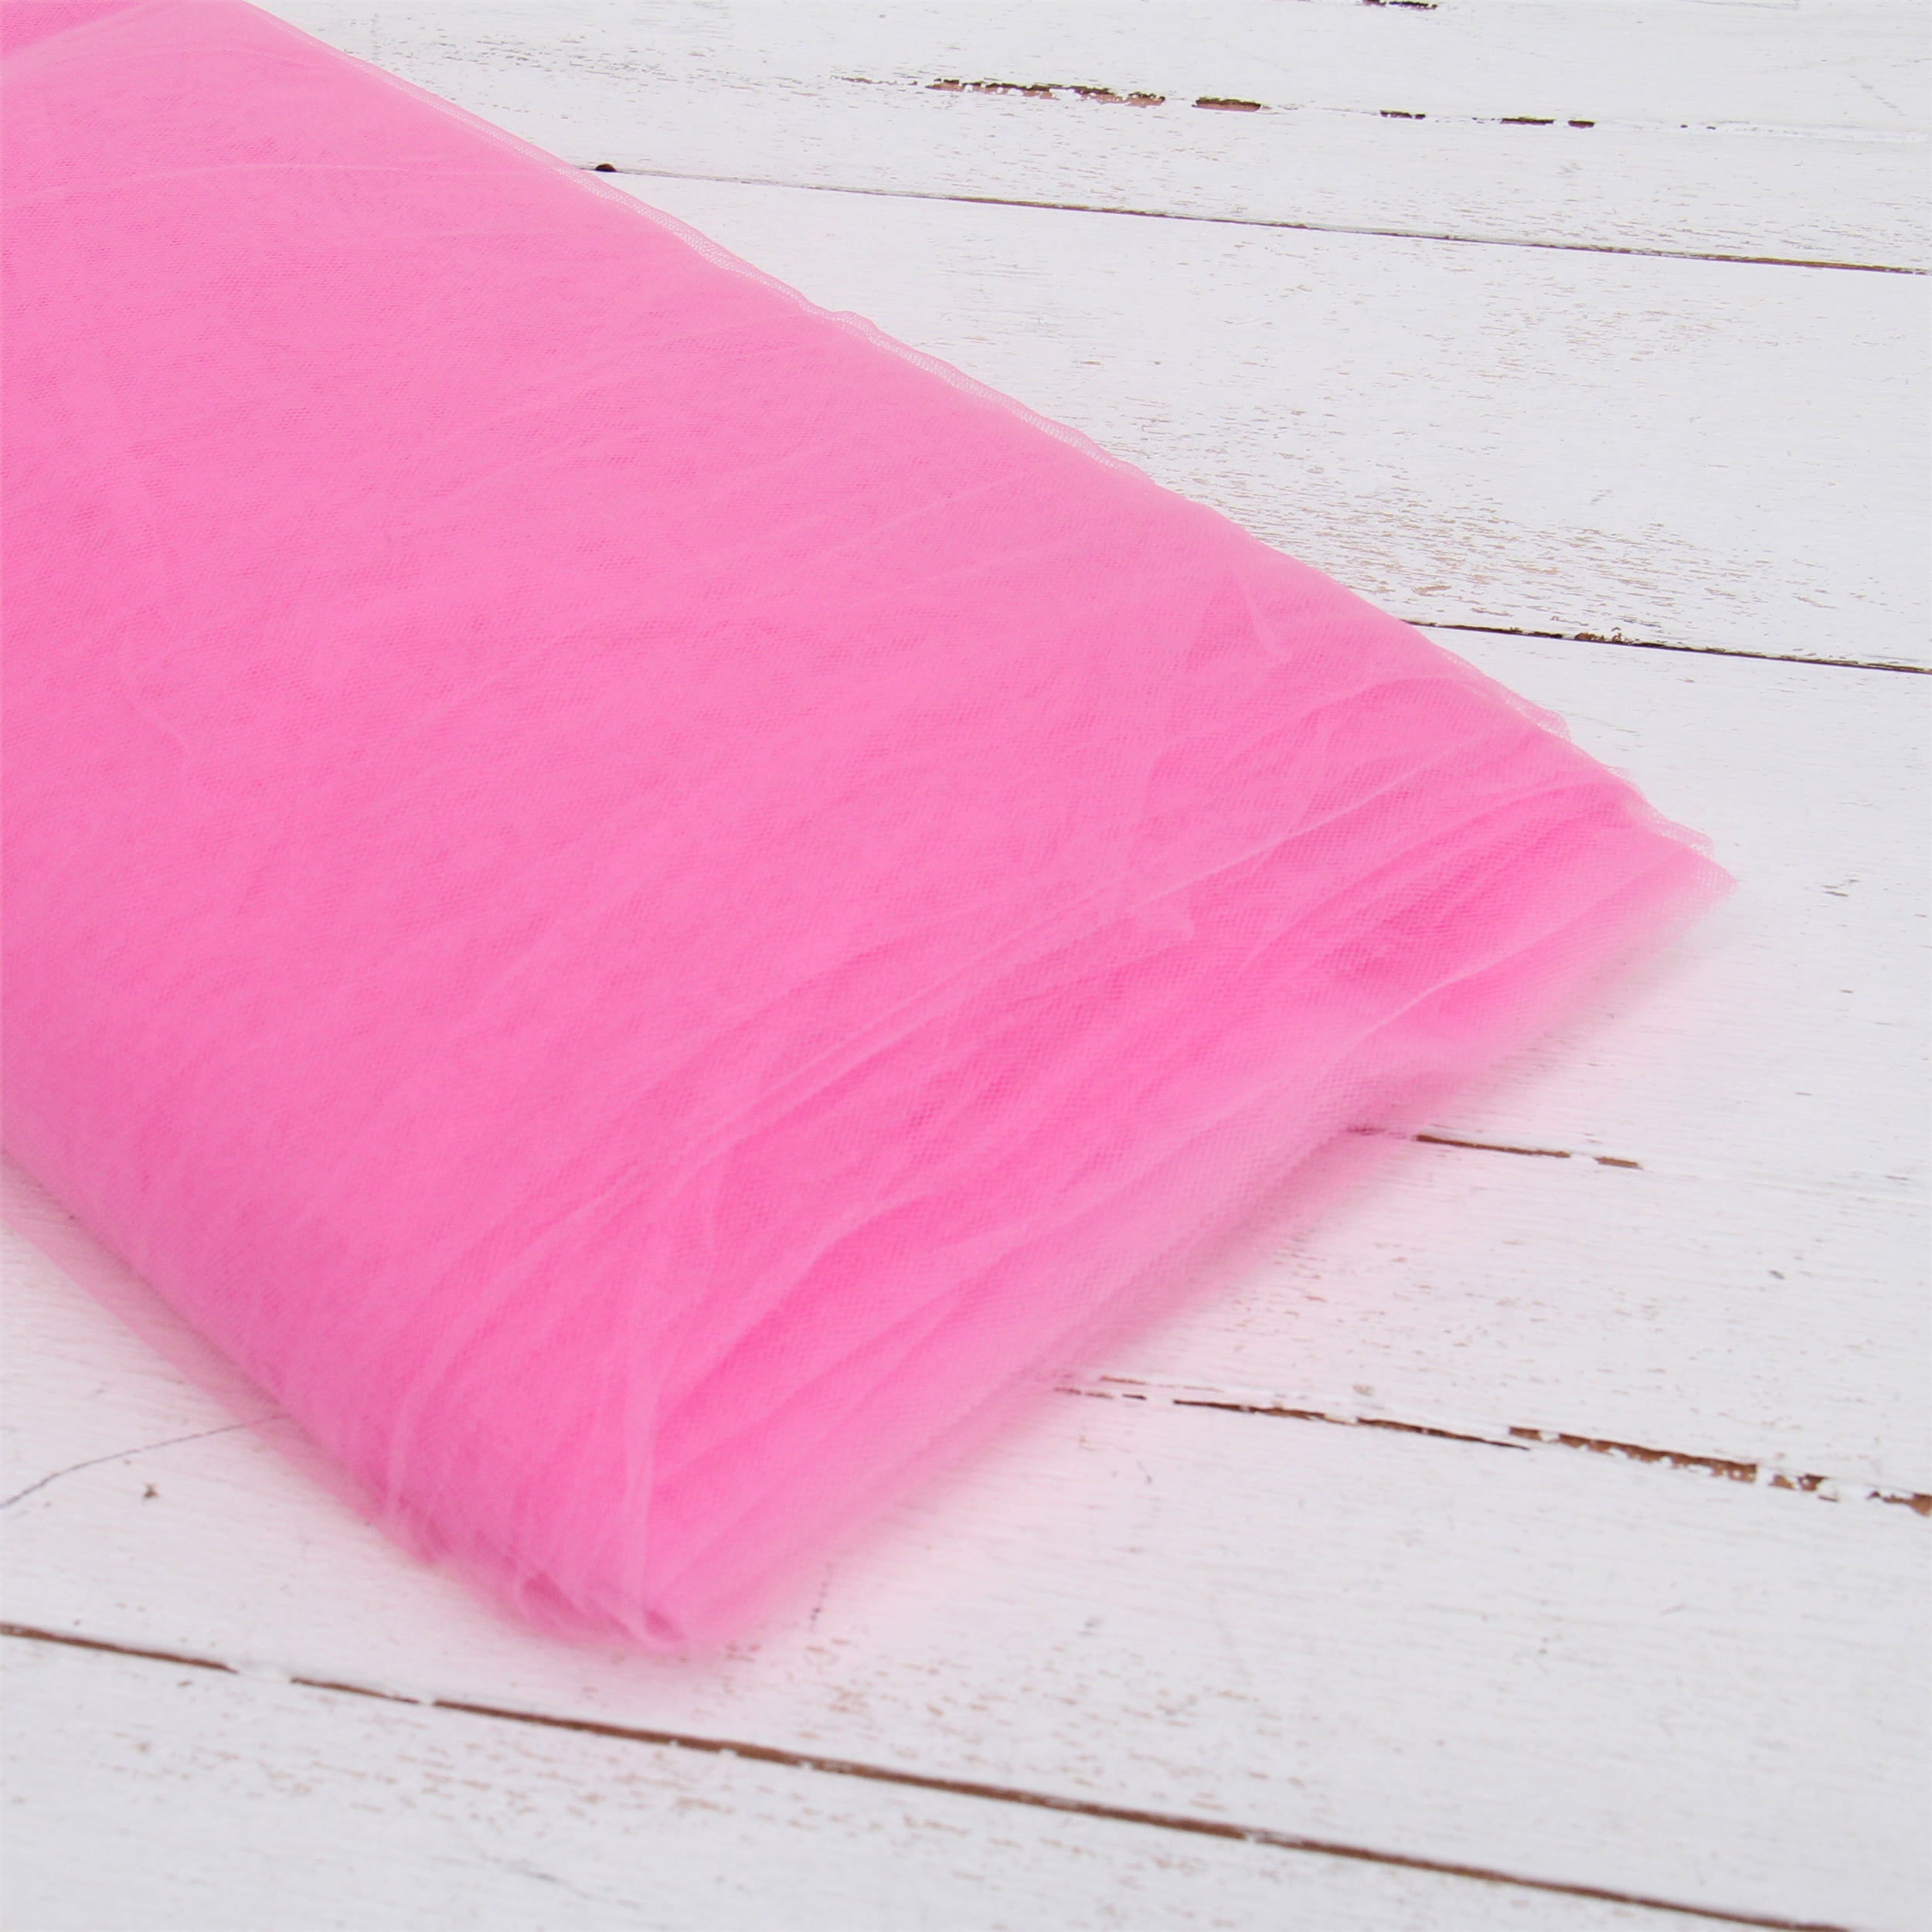 Threadart Tulle Bolt - 54 by 20 Yards (60 ft) Fabric for Wedding and  Decoration - Hot Pink